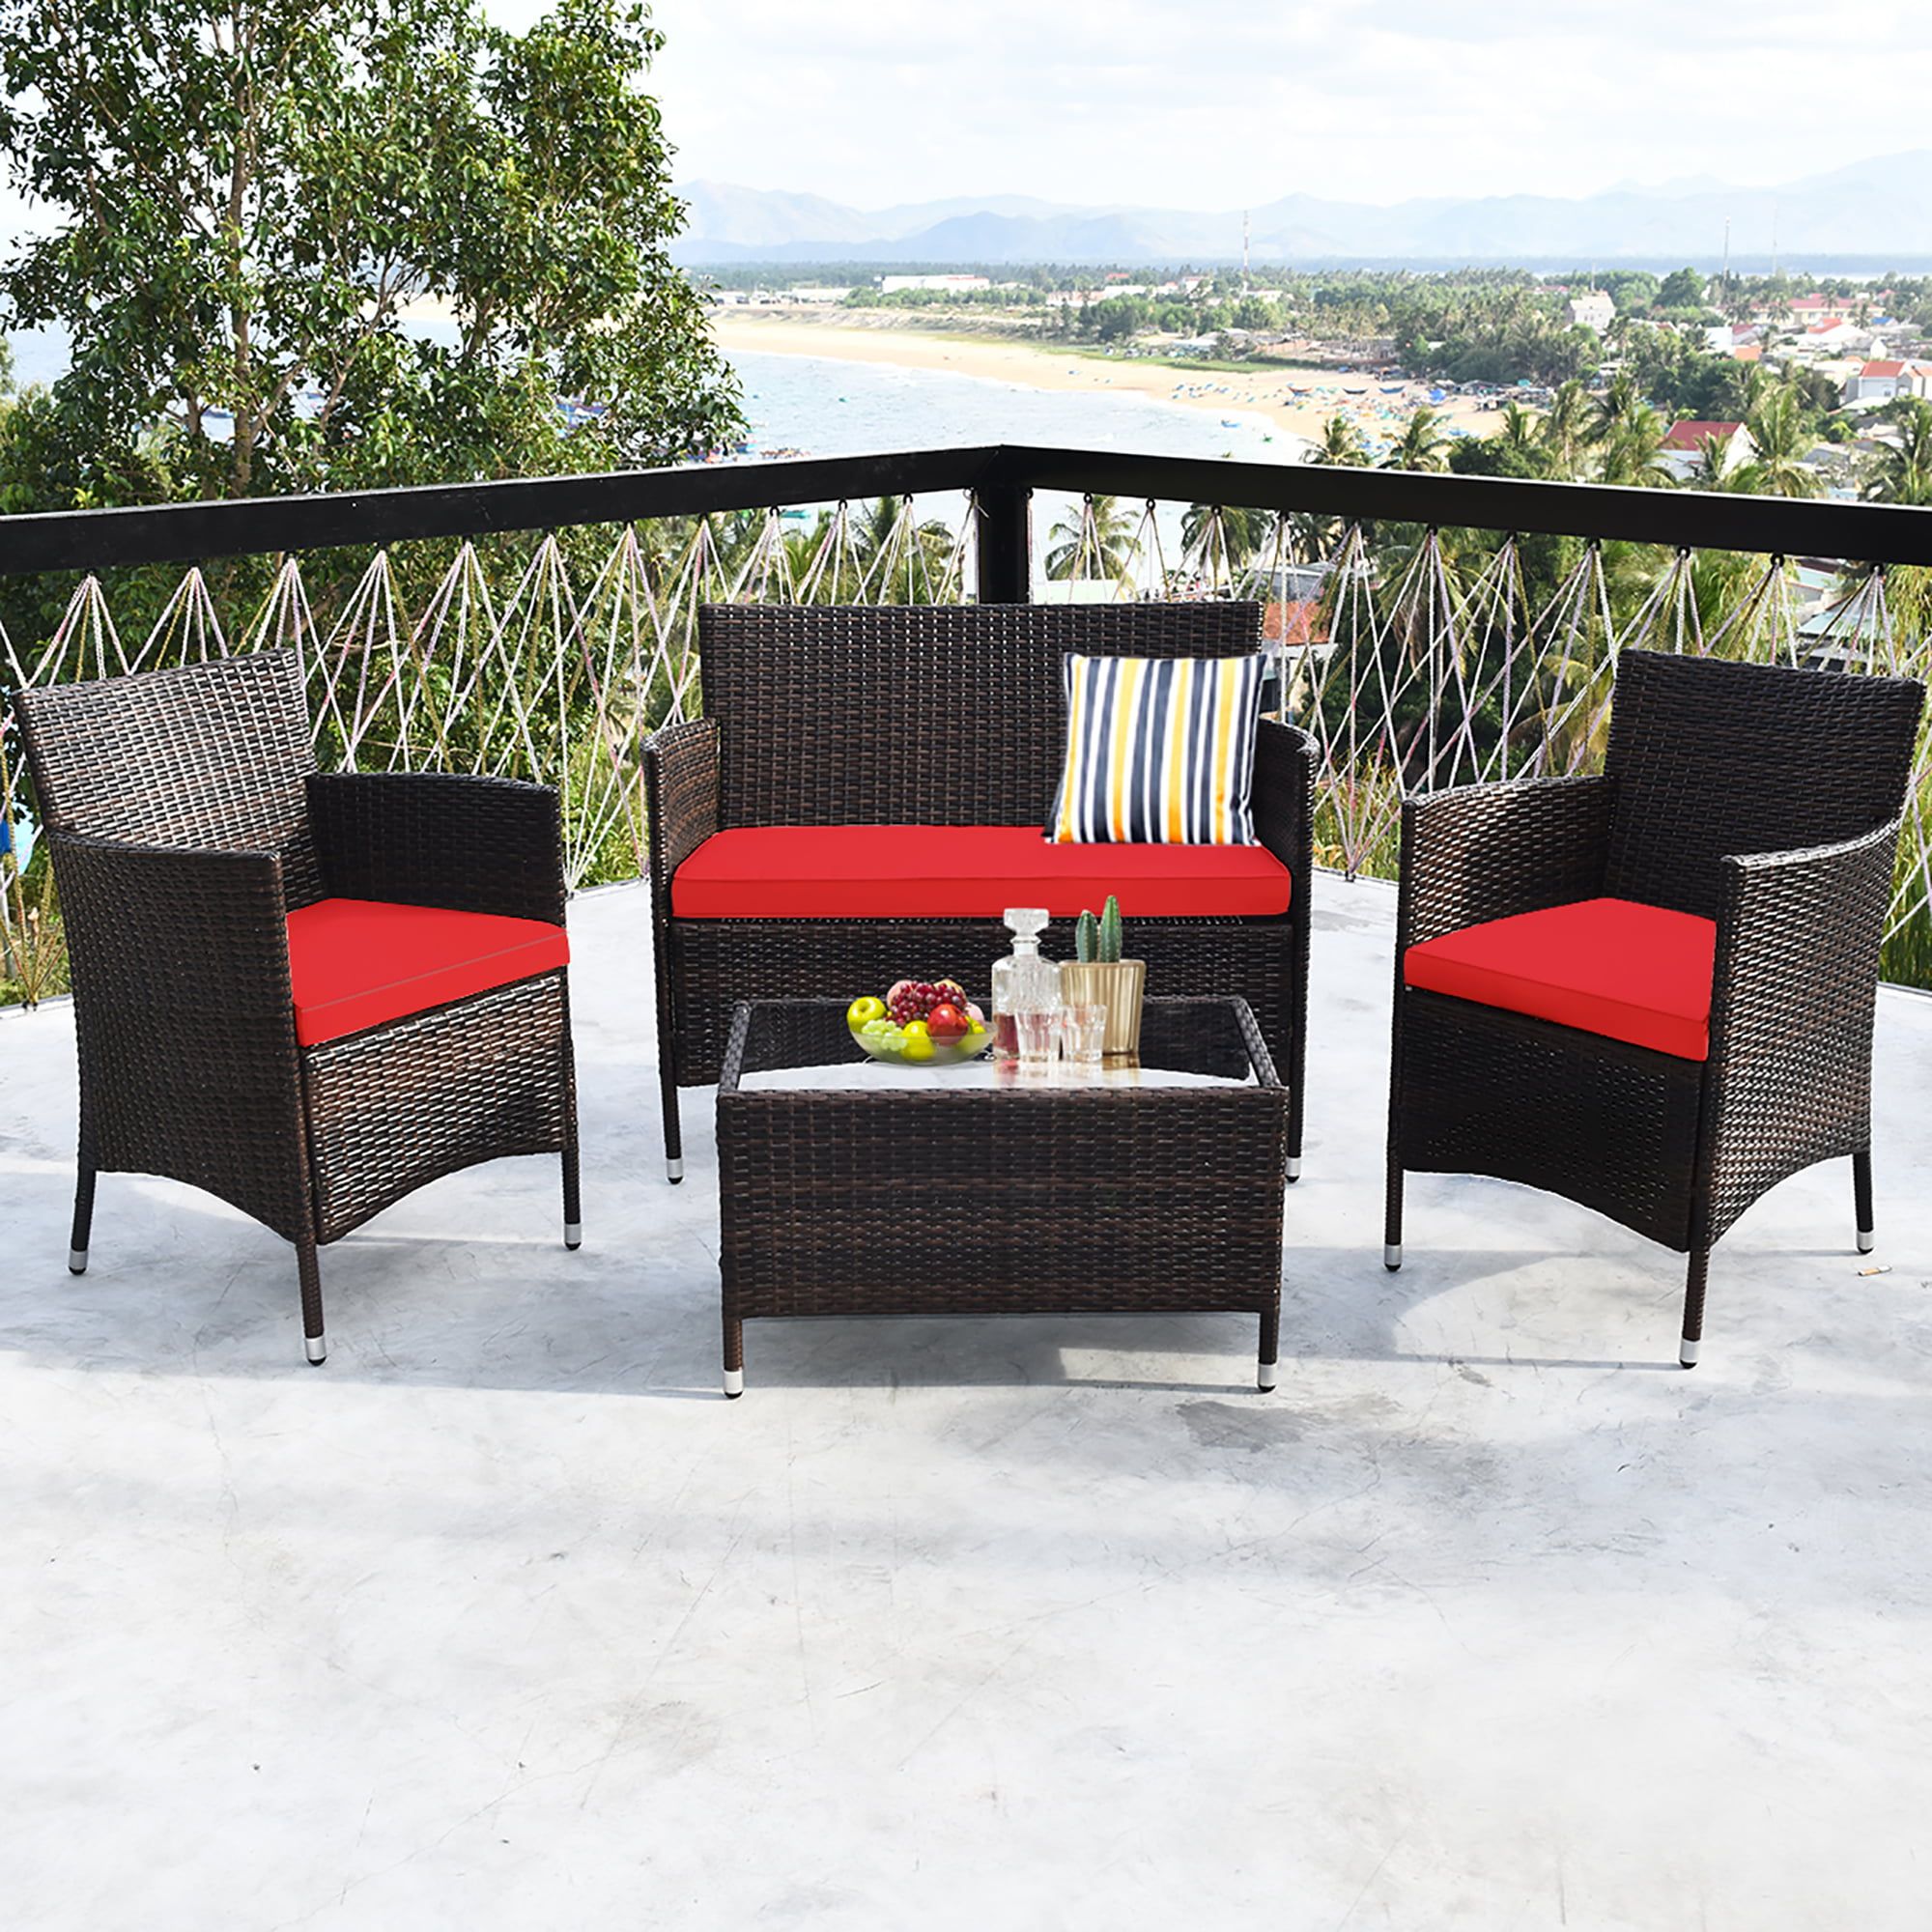 Costway 4pcs Rattan Patio Furniture Set Cushioned Sofa Chair Coffee Pertaining To 4pcs Rattan Patio Coffee Tables (Gallery 2 of 20)